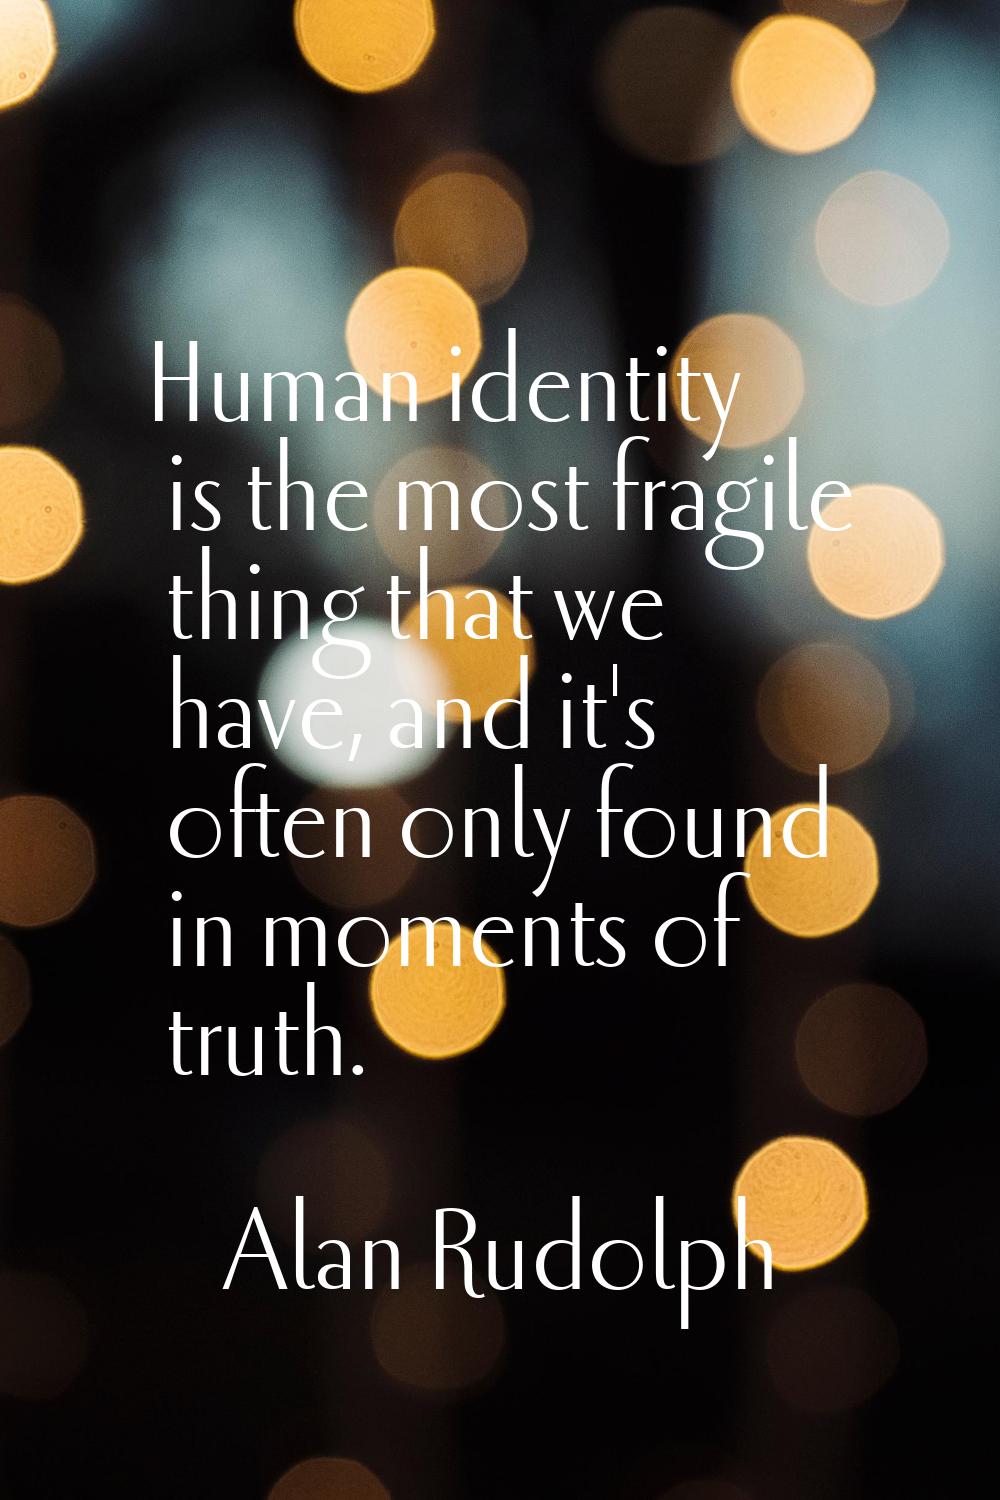 Human identity is the most fragile thing that we have, and it's often only found in moments of trut